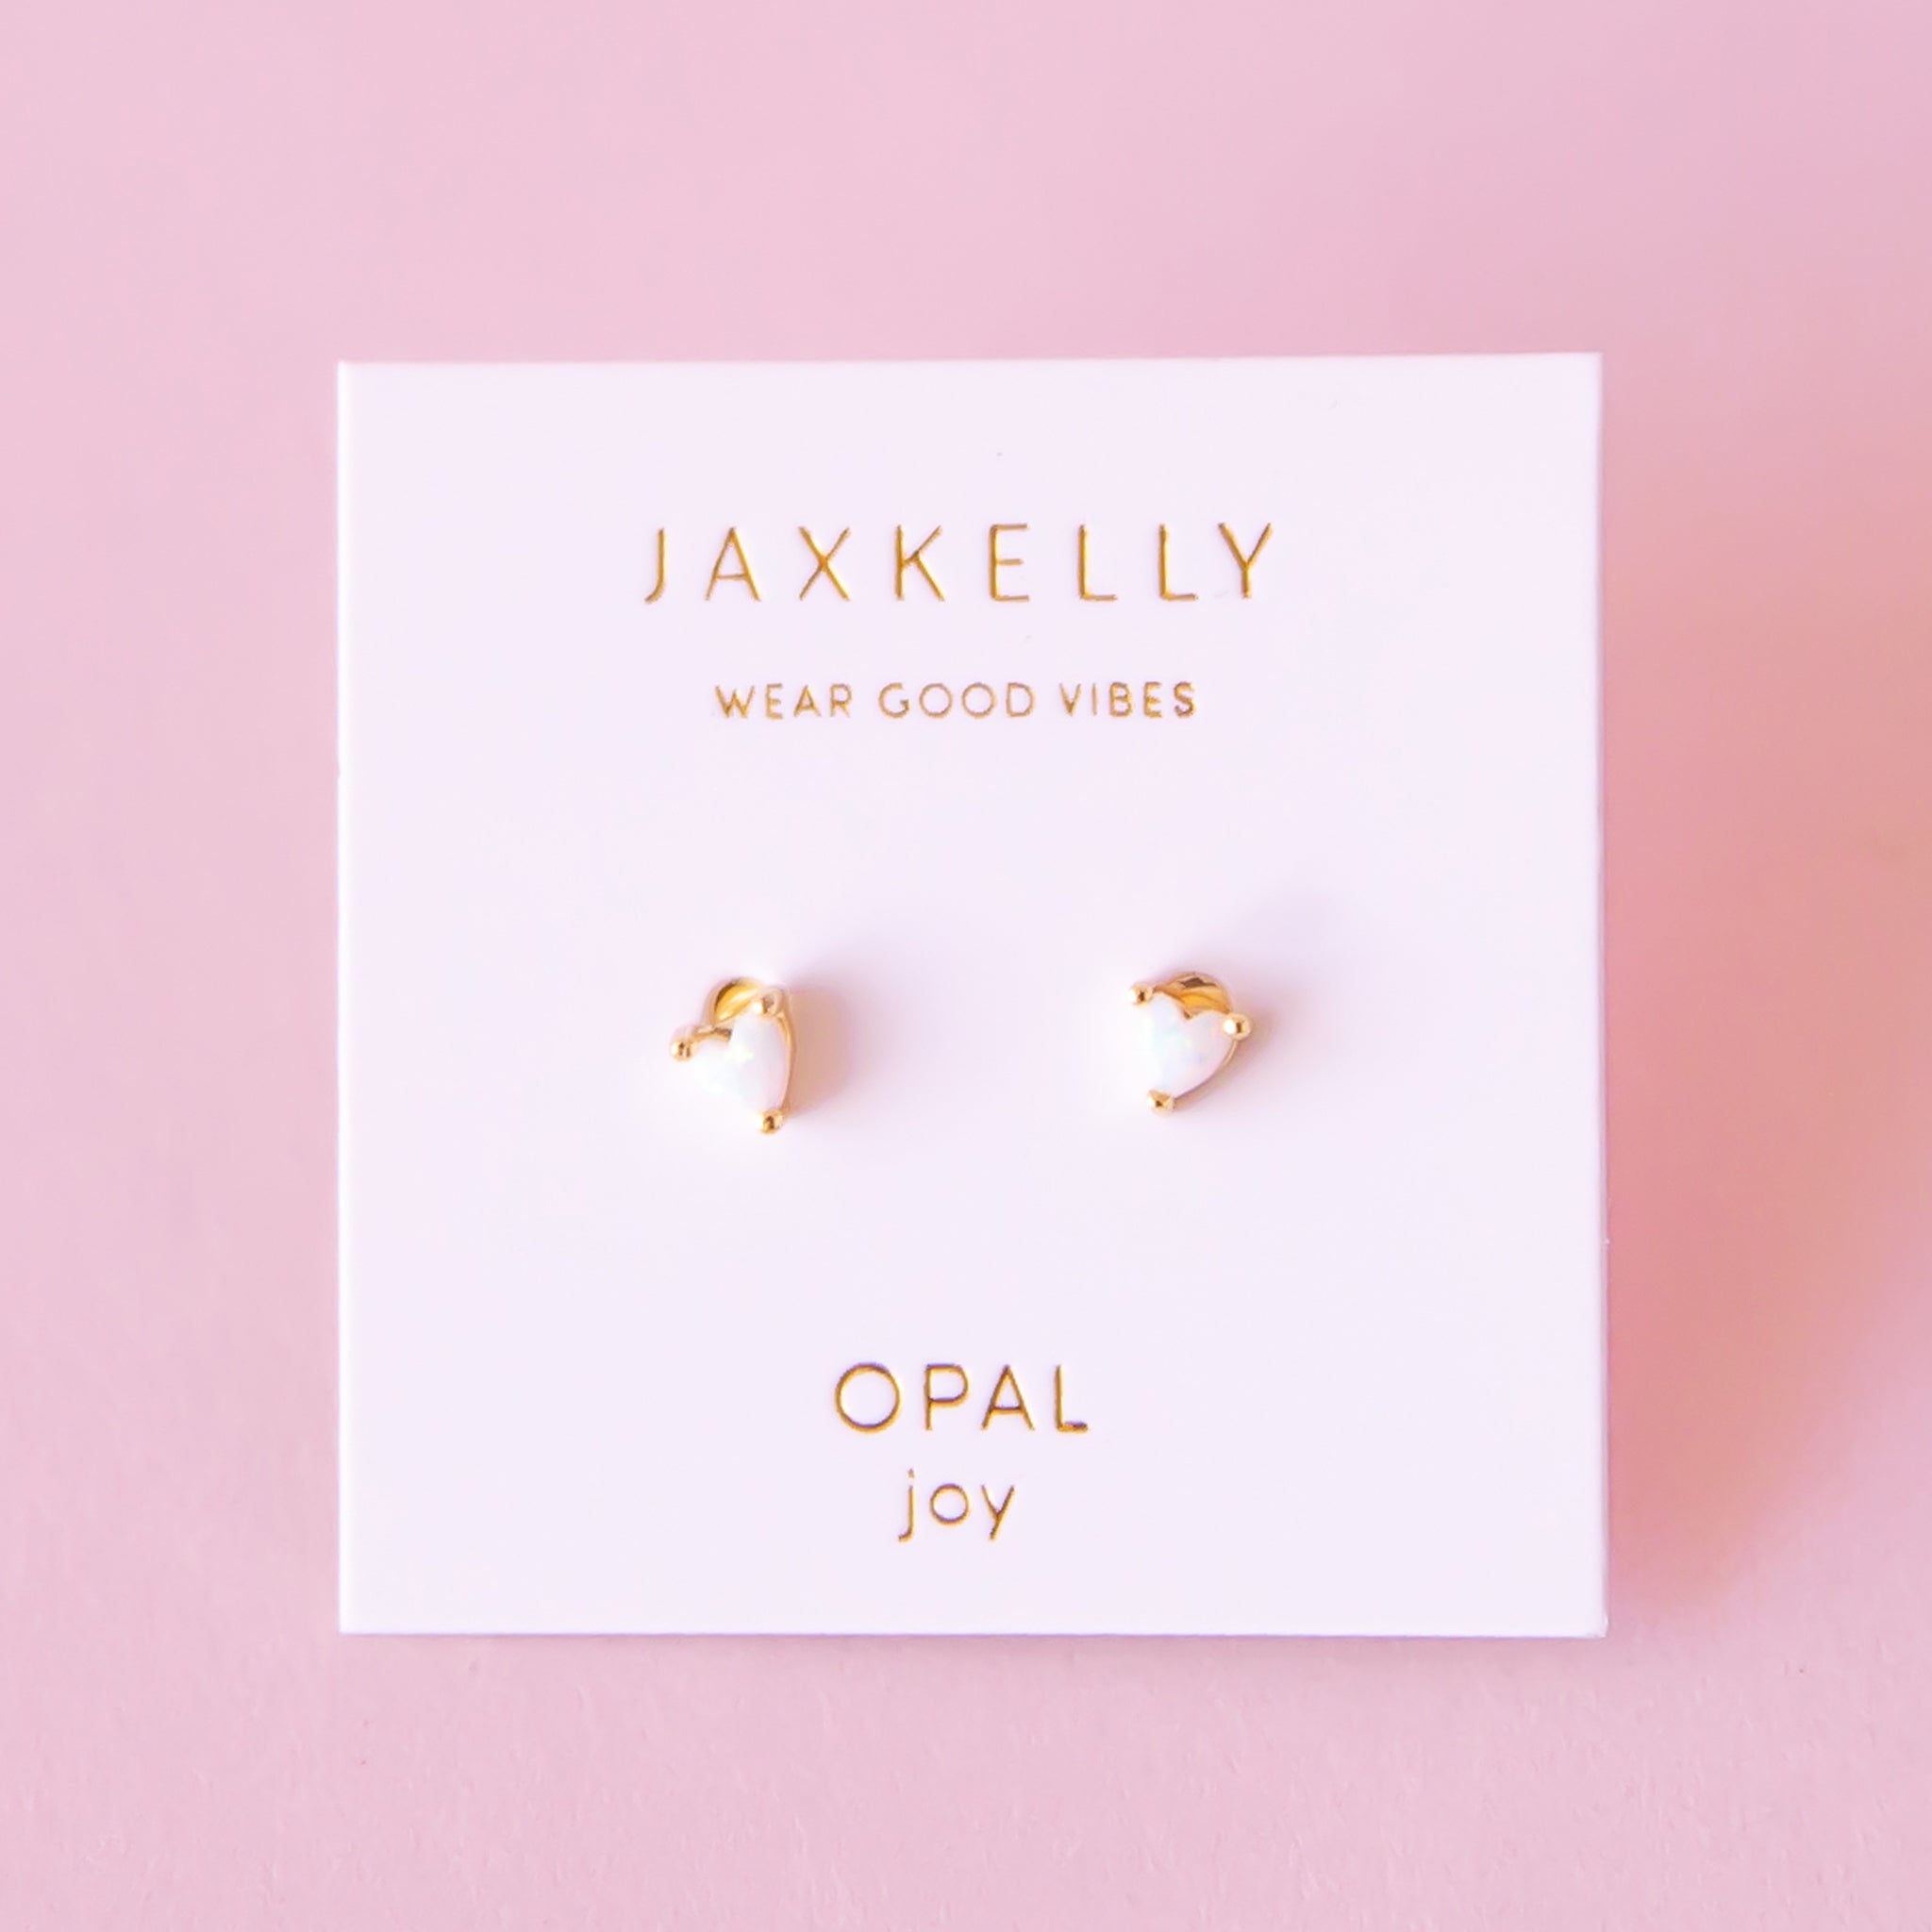 On a pink background is a pair of tiny heart shaped stud earrings with a white opal center.